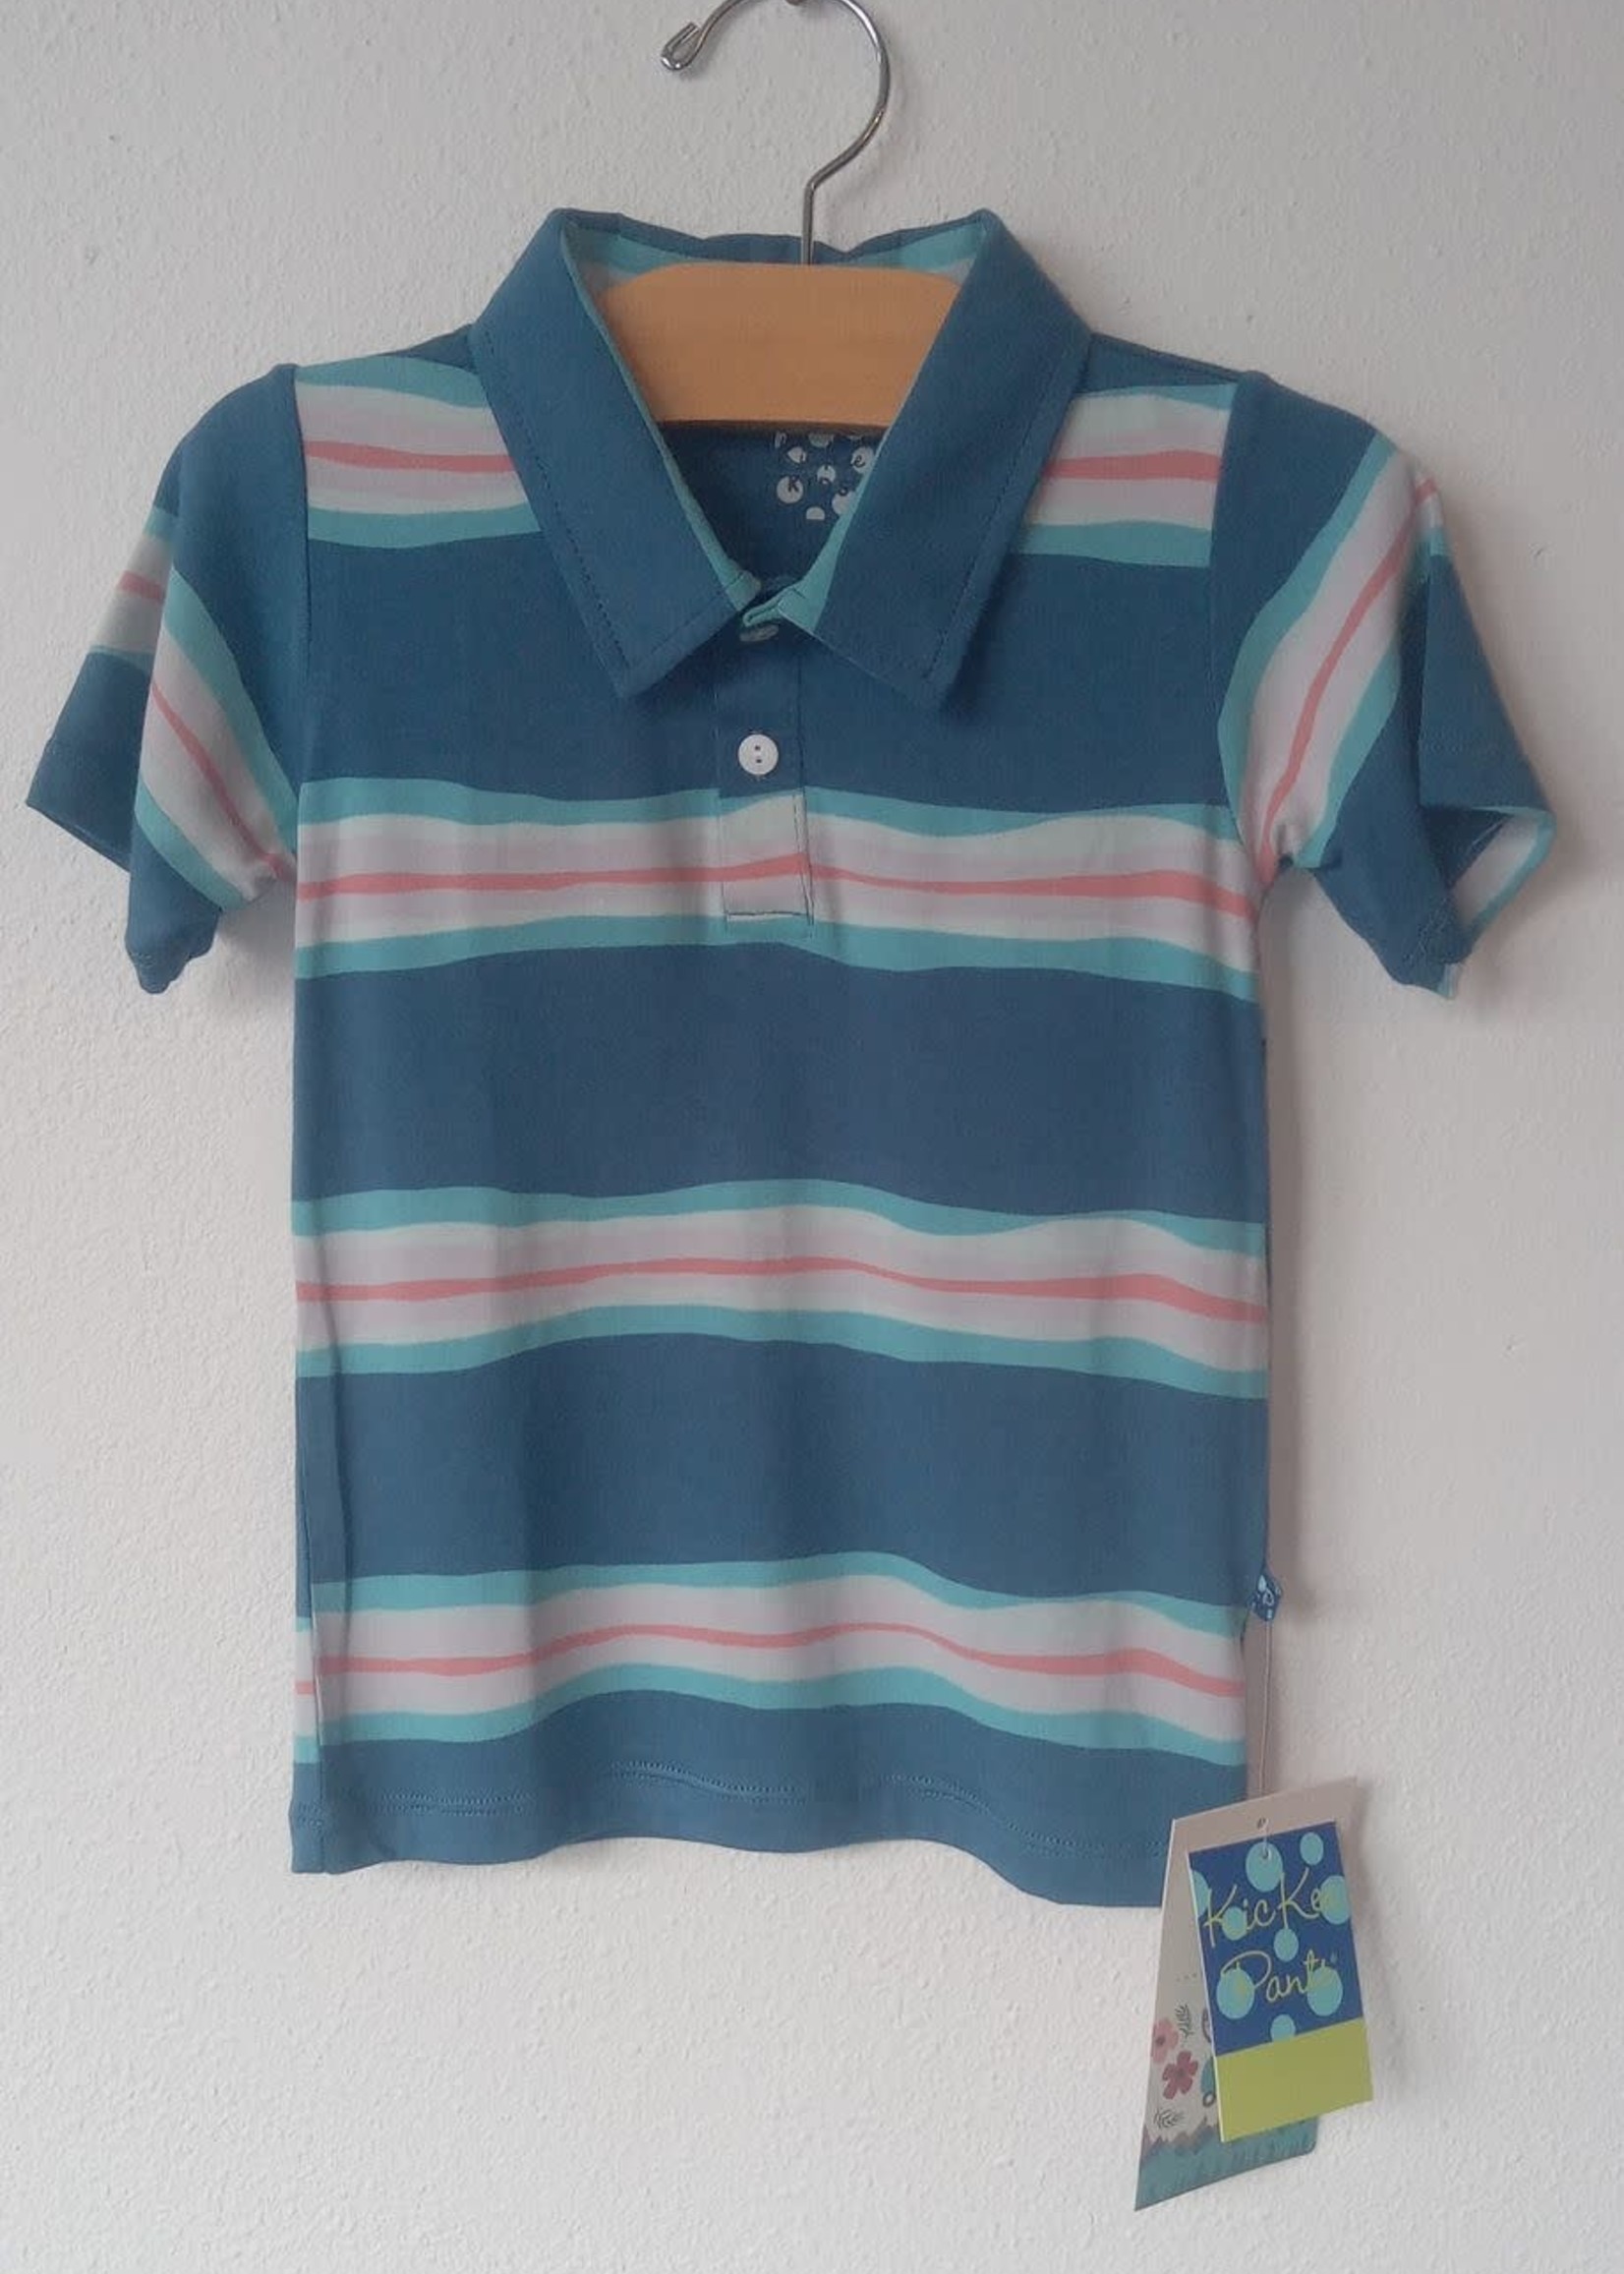 Kickee Lux Jersey Polo